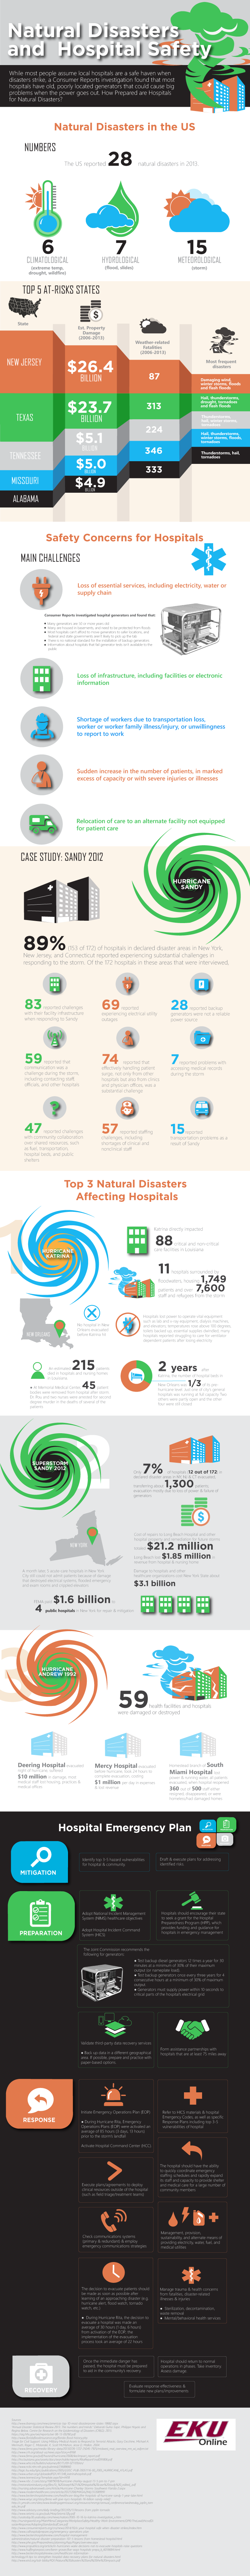 Natural Disasters and Hospital Safety